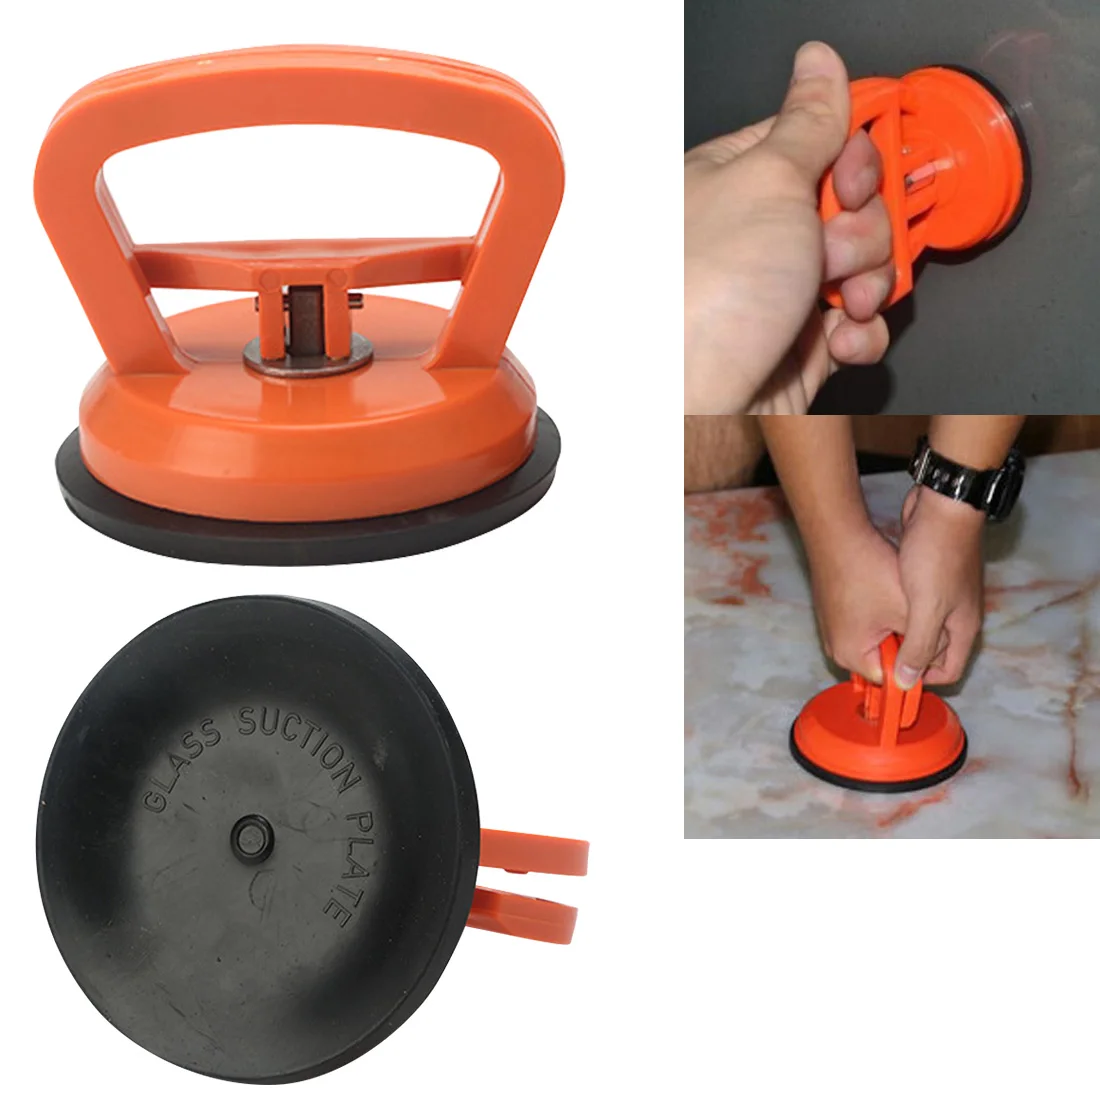 

ABS 123mm Car Dent Puller Vacuum Suction Cup Single Claw Sucker Tile Extractor Floor Tiles Glass Sucker Lifter Carrier Tool